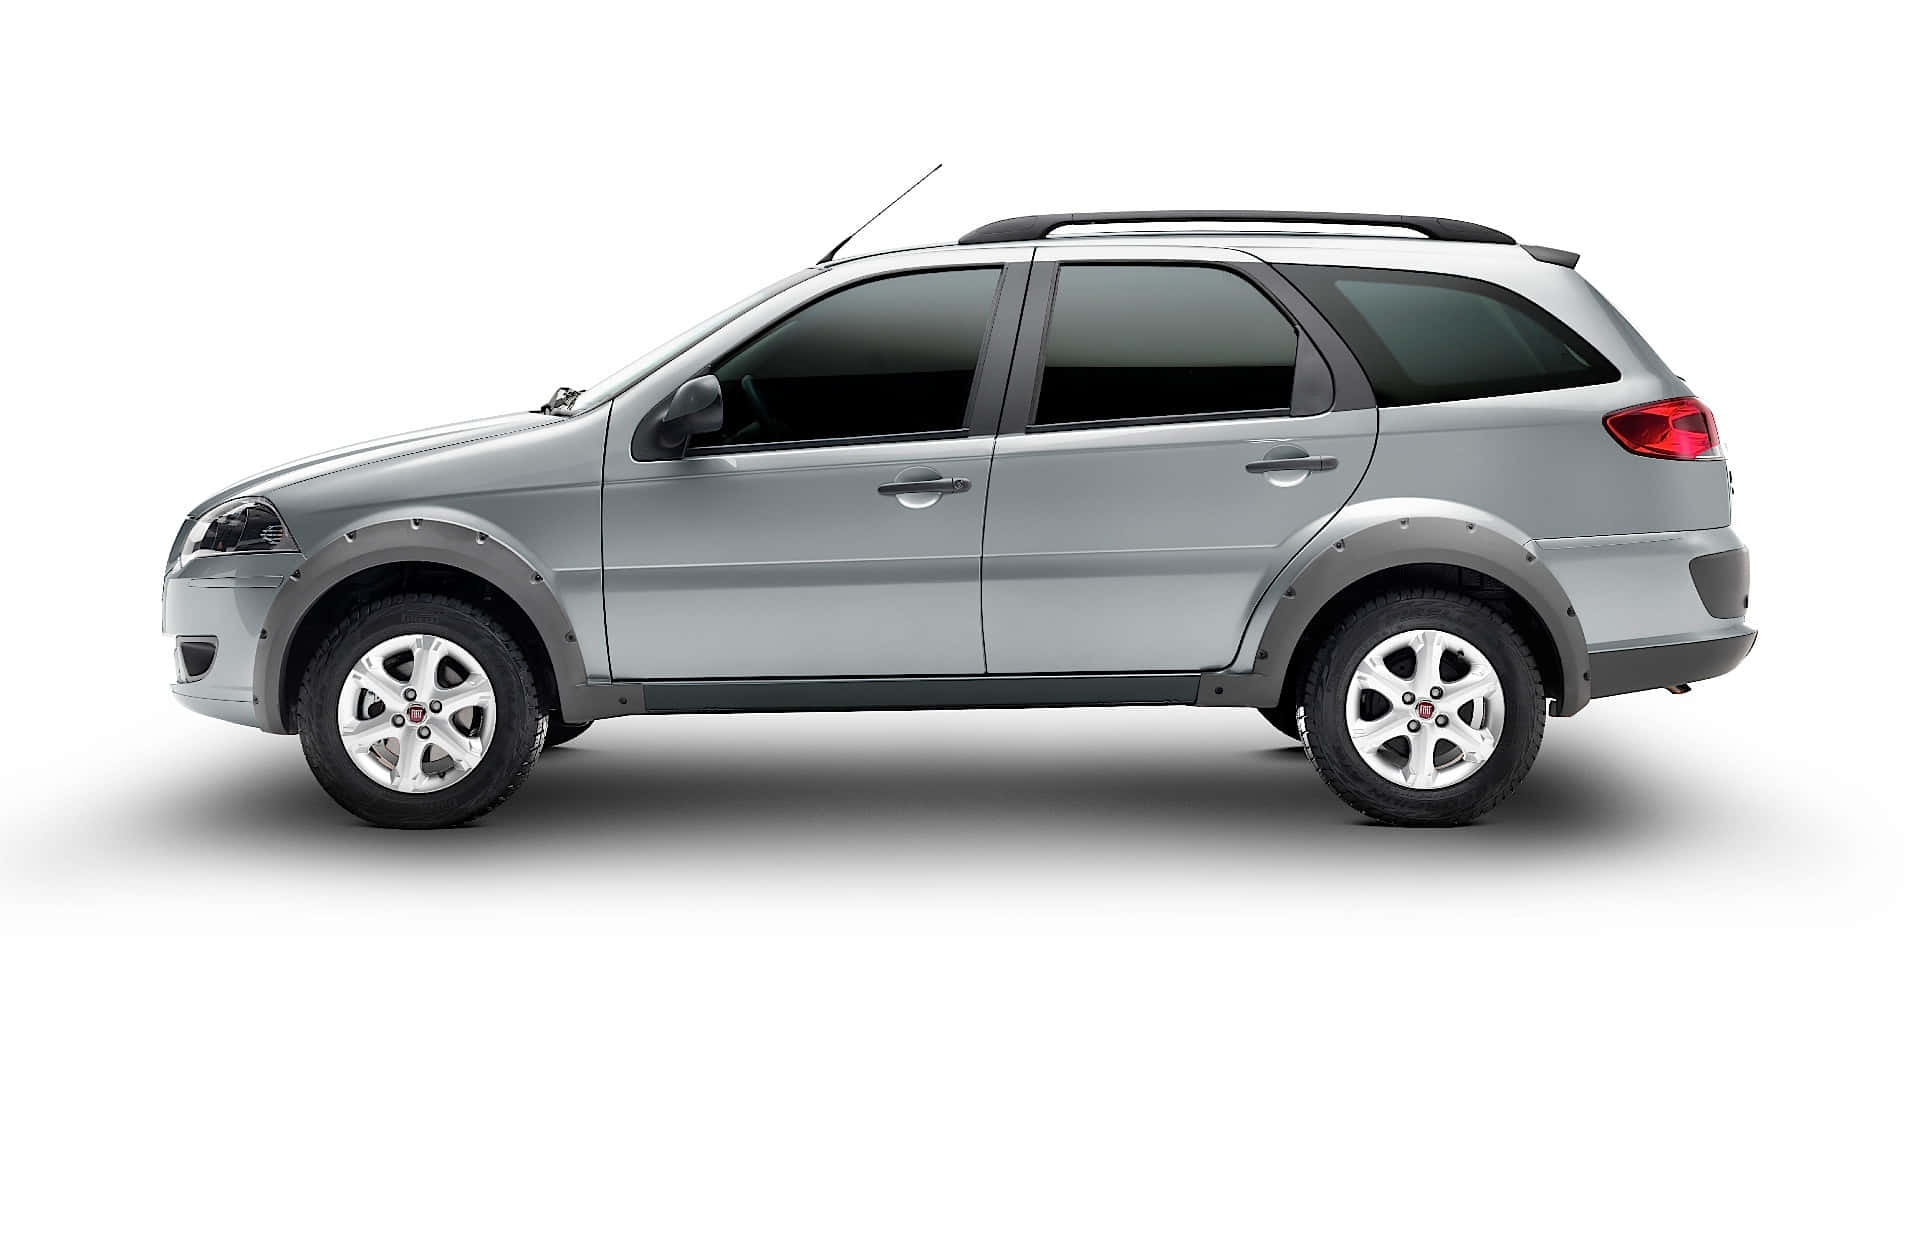 Sleek and Stylish Fiat Palio on the Road Wallpaper